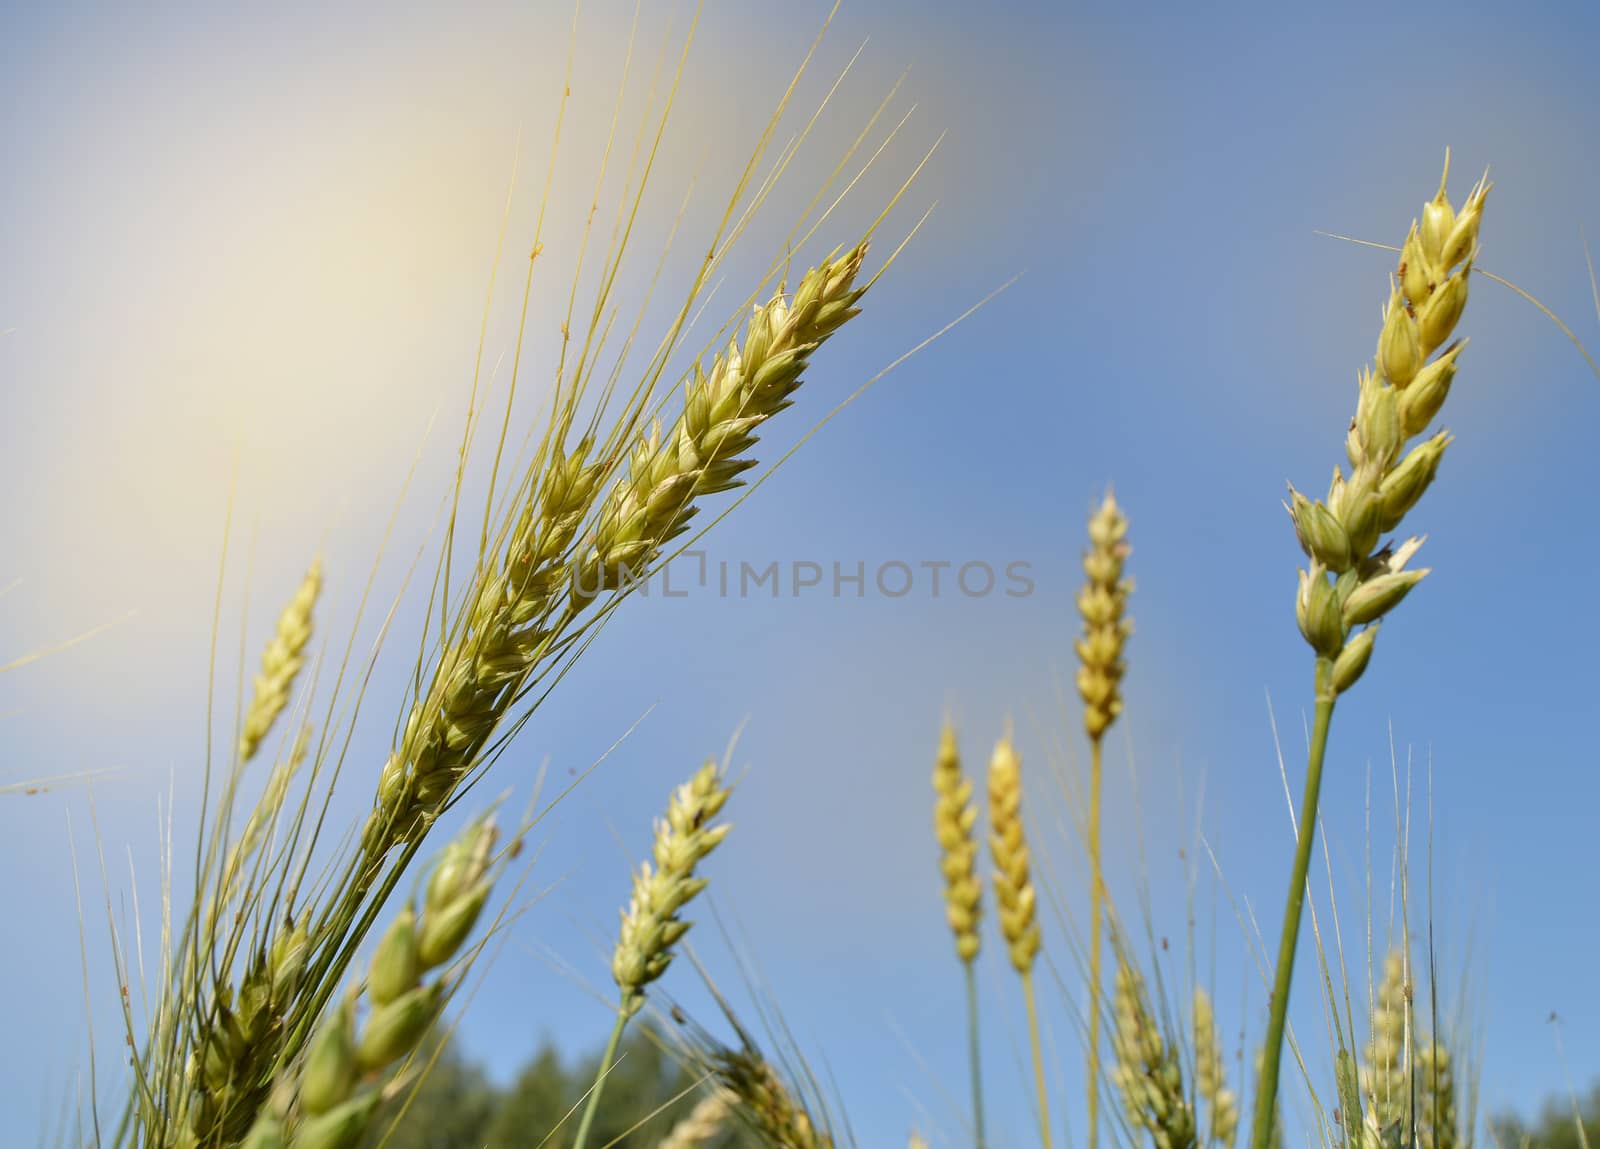 Ears of oats and wheat ripen in the field against the blue sky and sunlight. The concept of growing organic bio products.